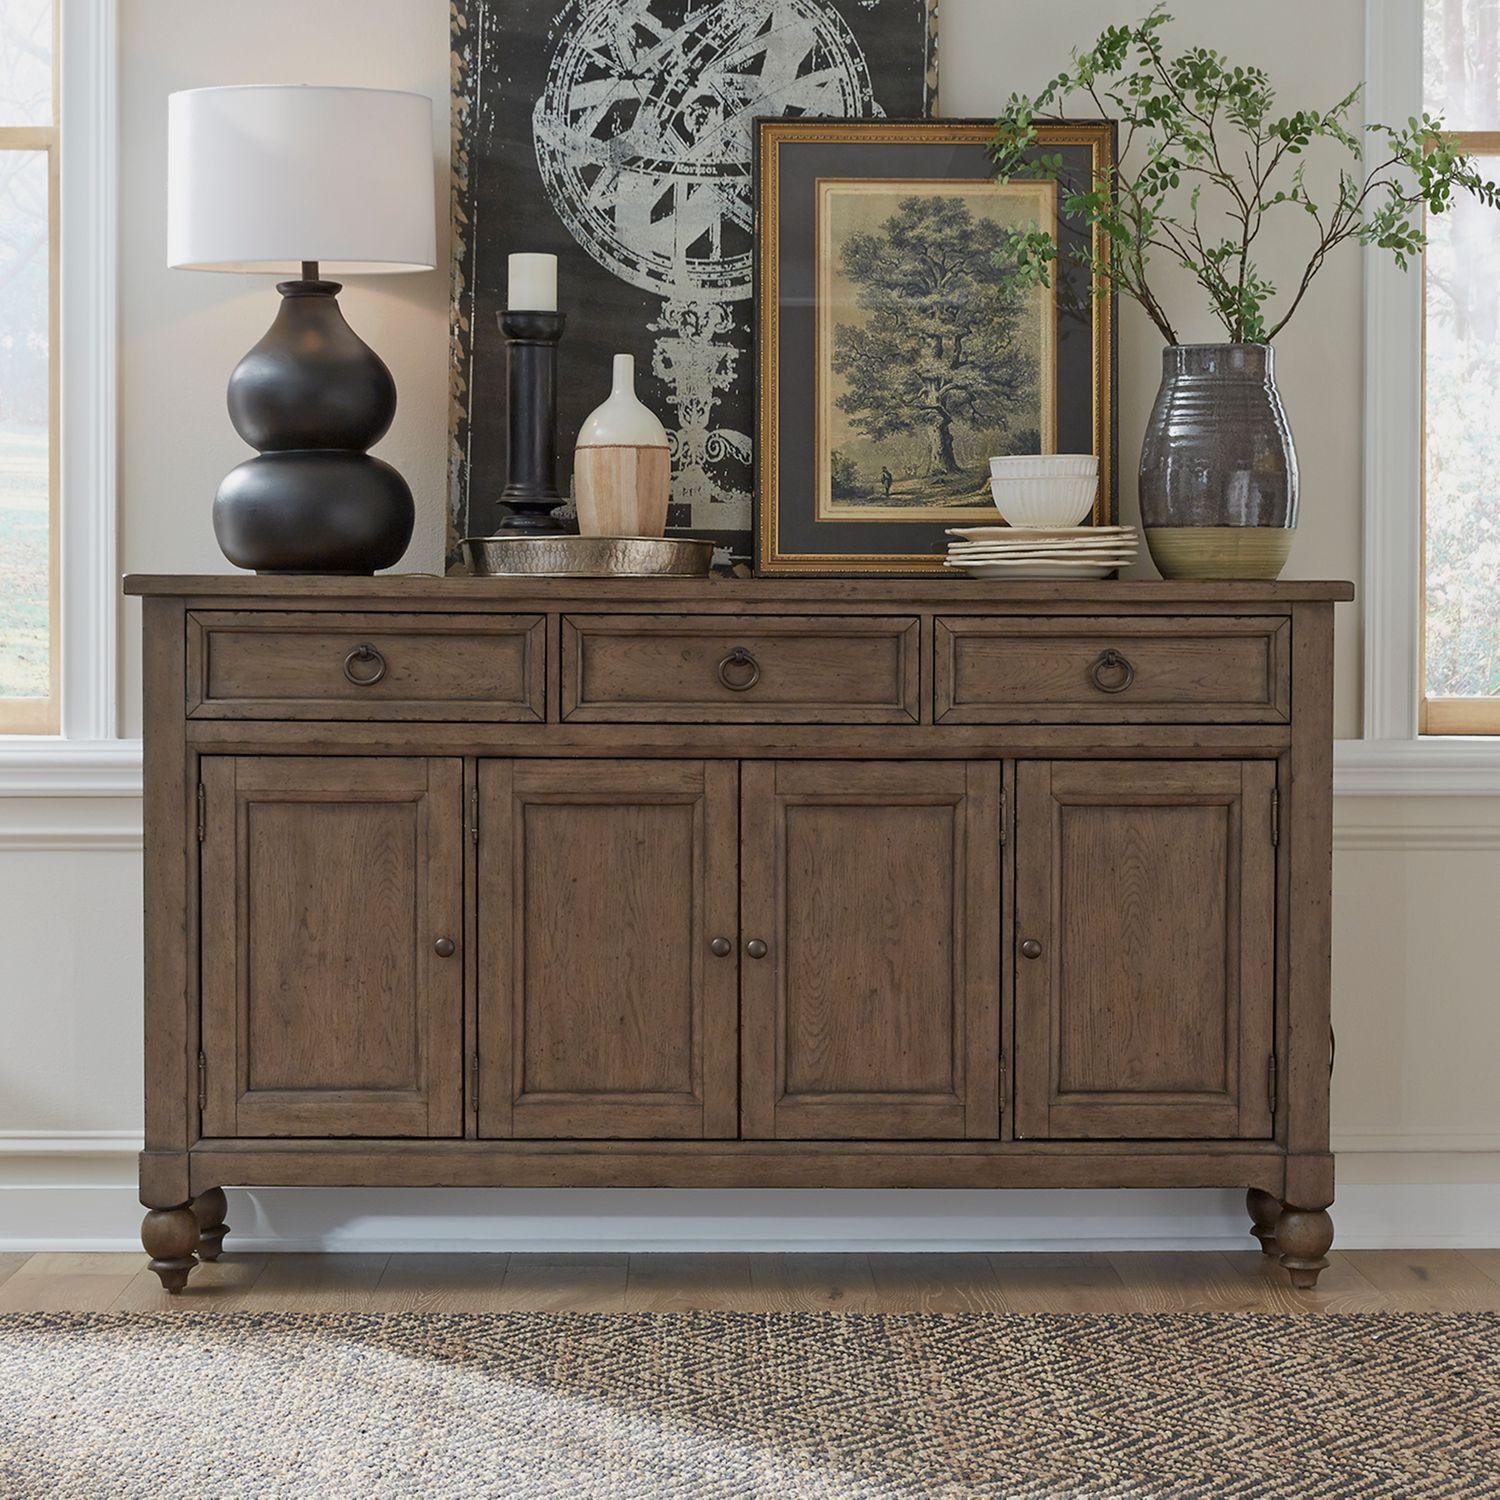 Transitional Buffet Americana Farmhouse (615-DR) 615-HB7242 in Taupe, Black 